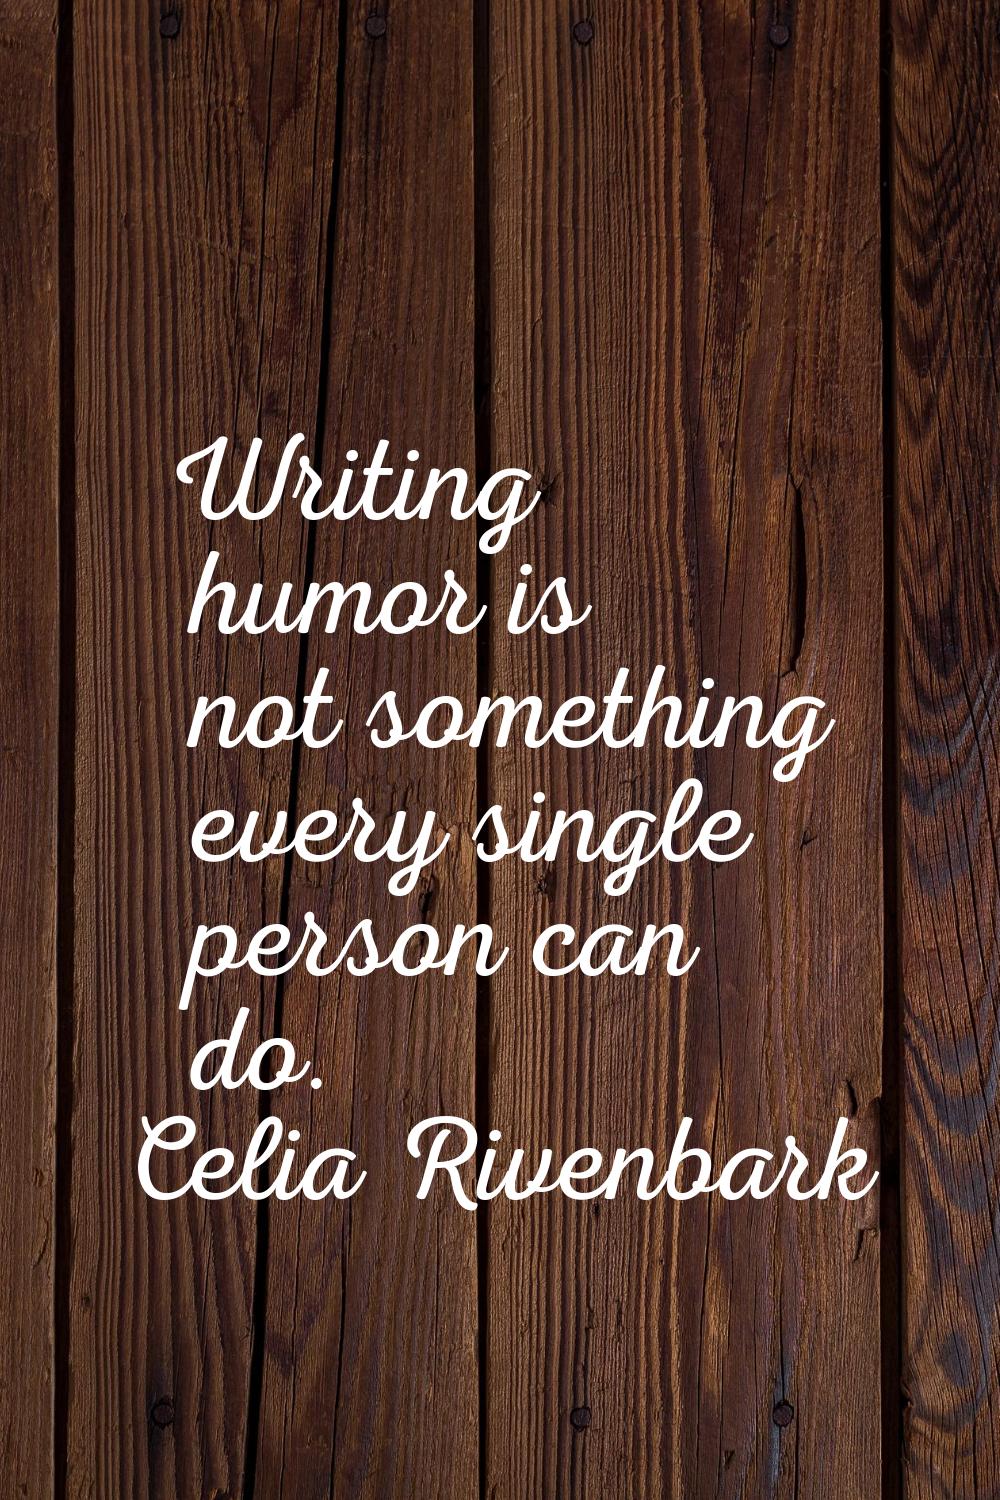 Writing humor is not something every single person can do.